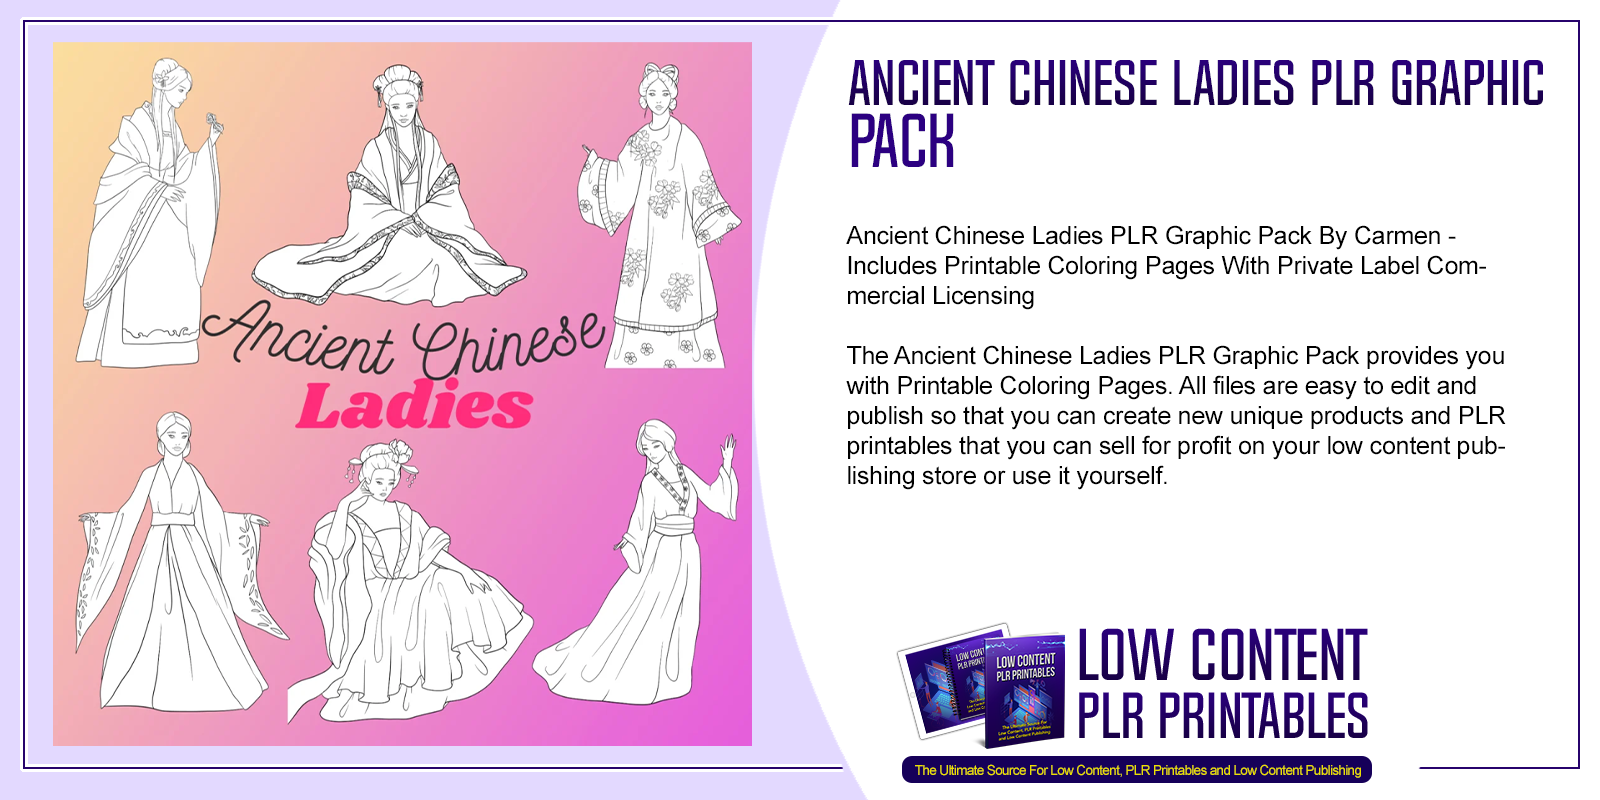 Ancient Chinese Ladies PLR Graphic Pack